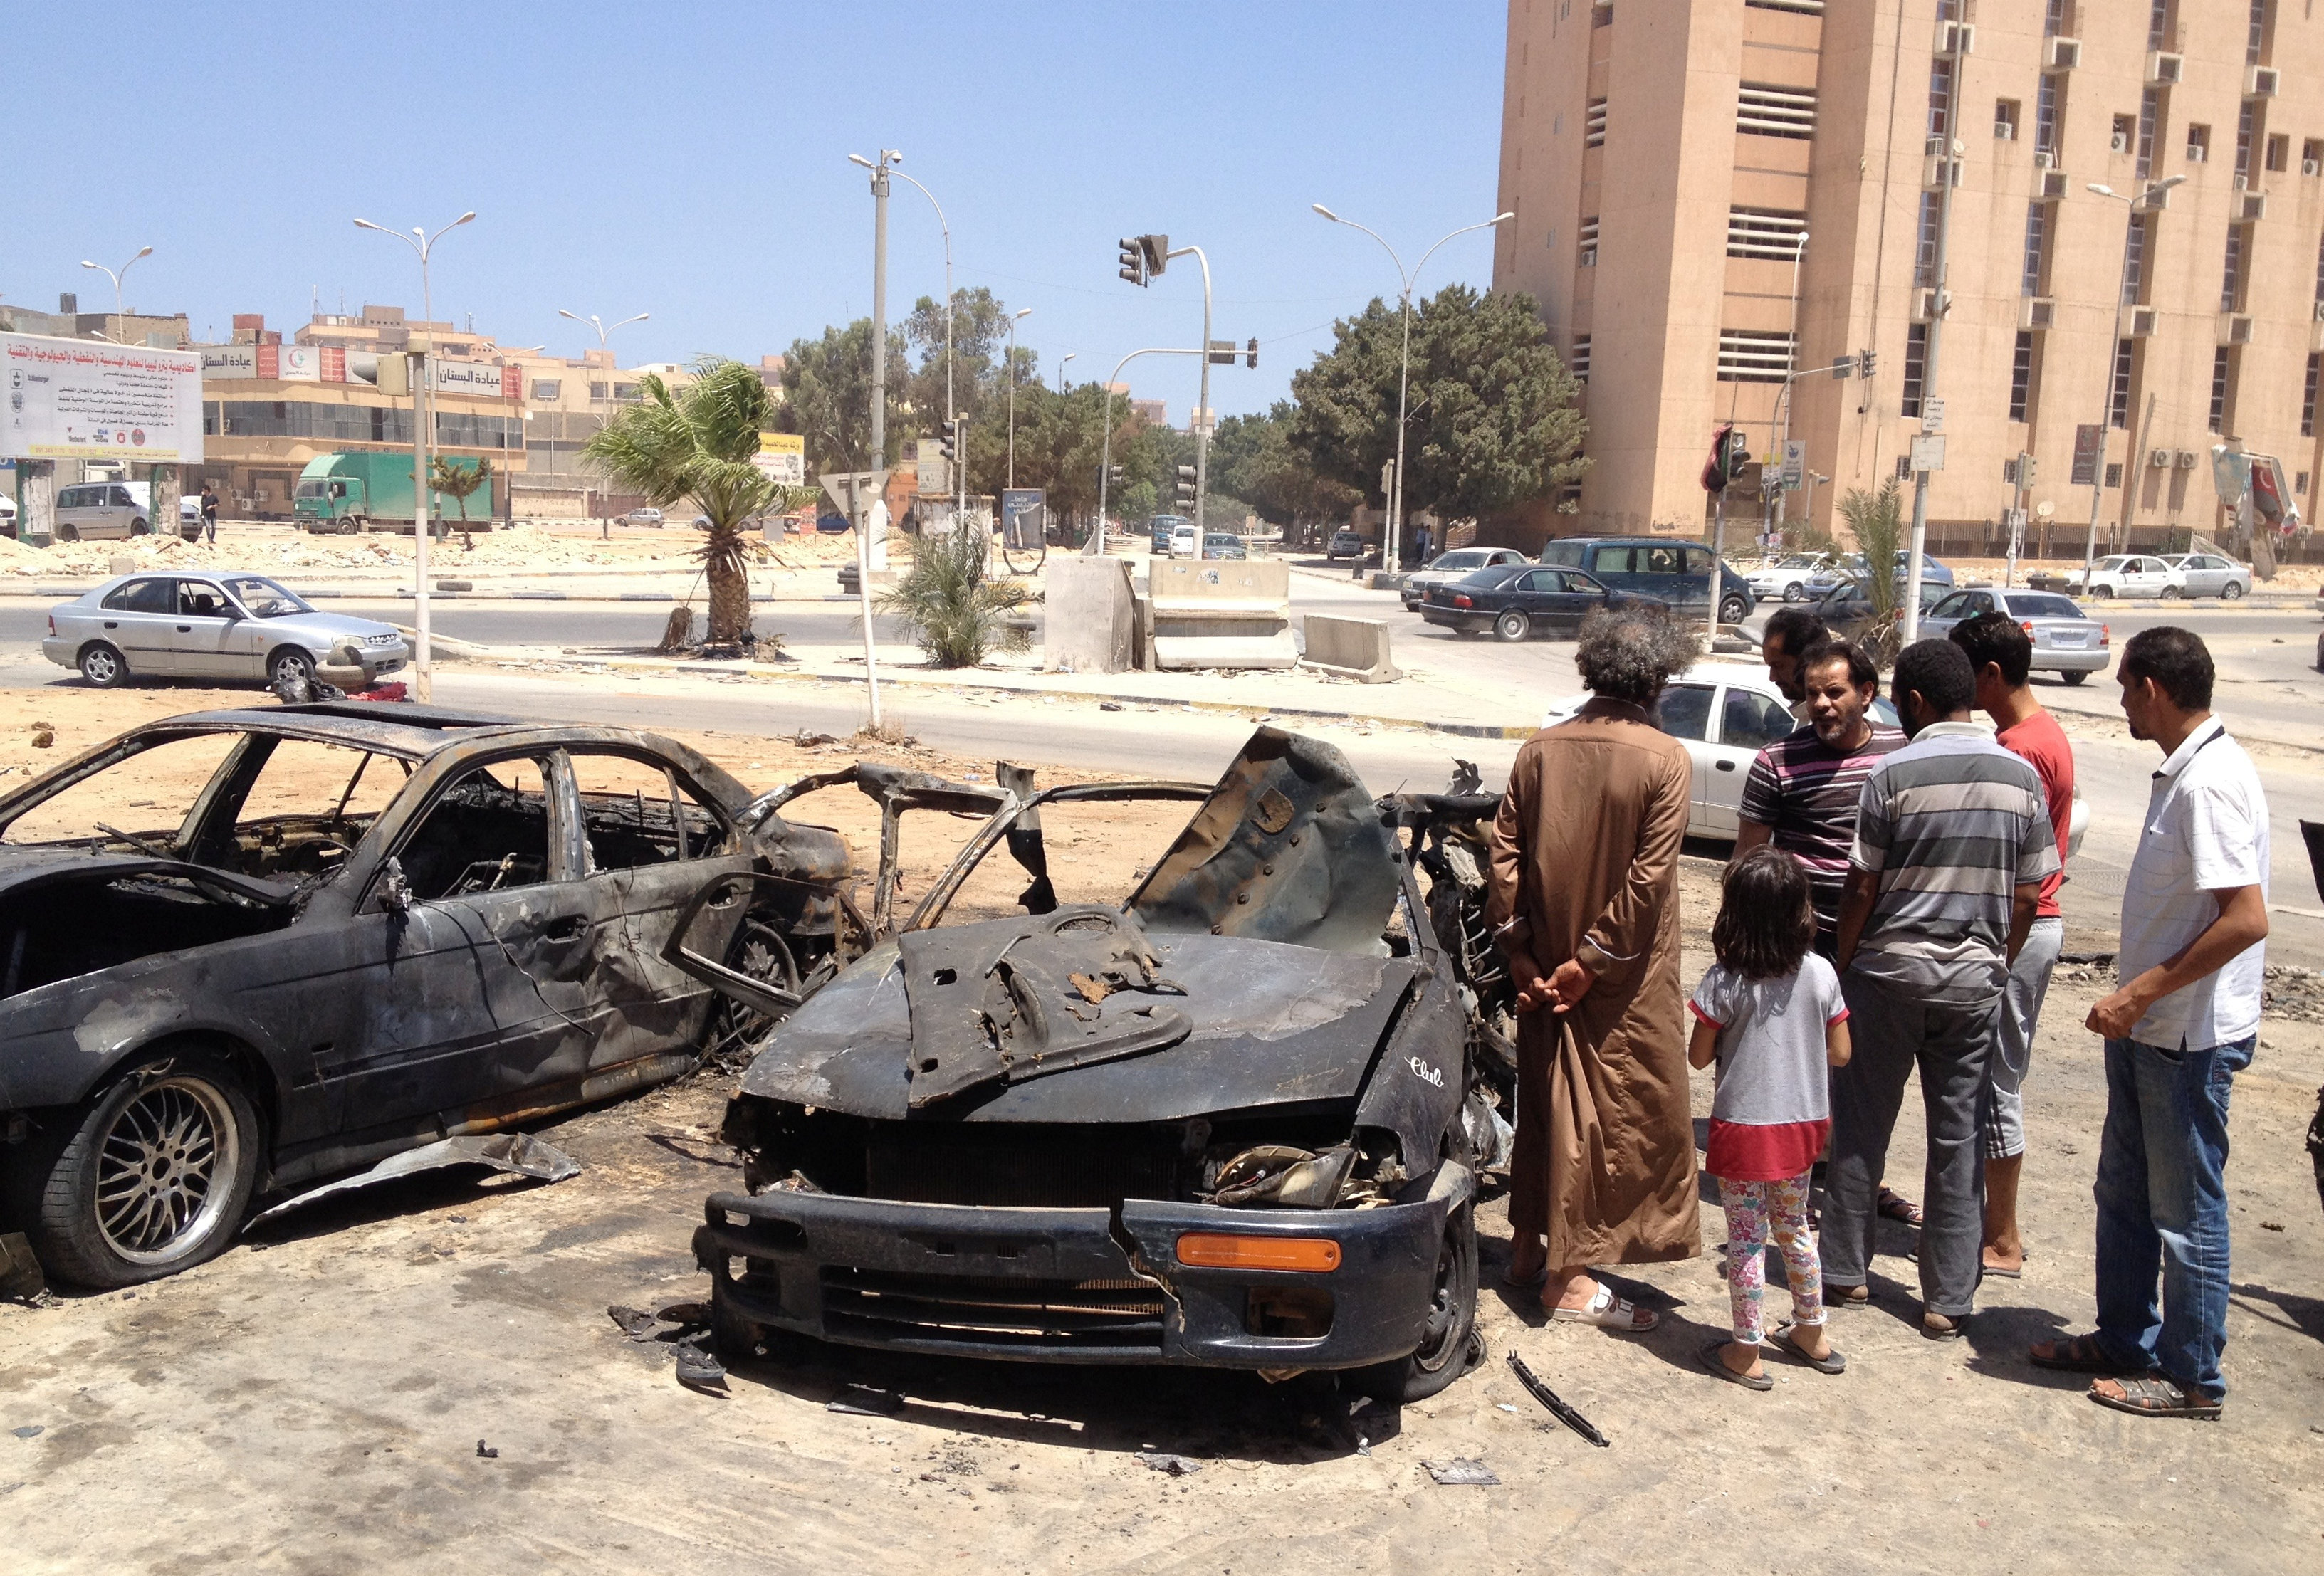 Seven civilians killed by shelling in Benghazi - hospital official